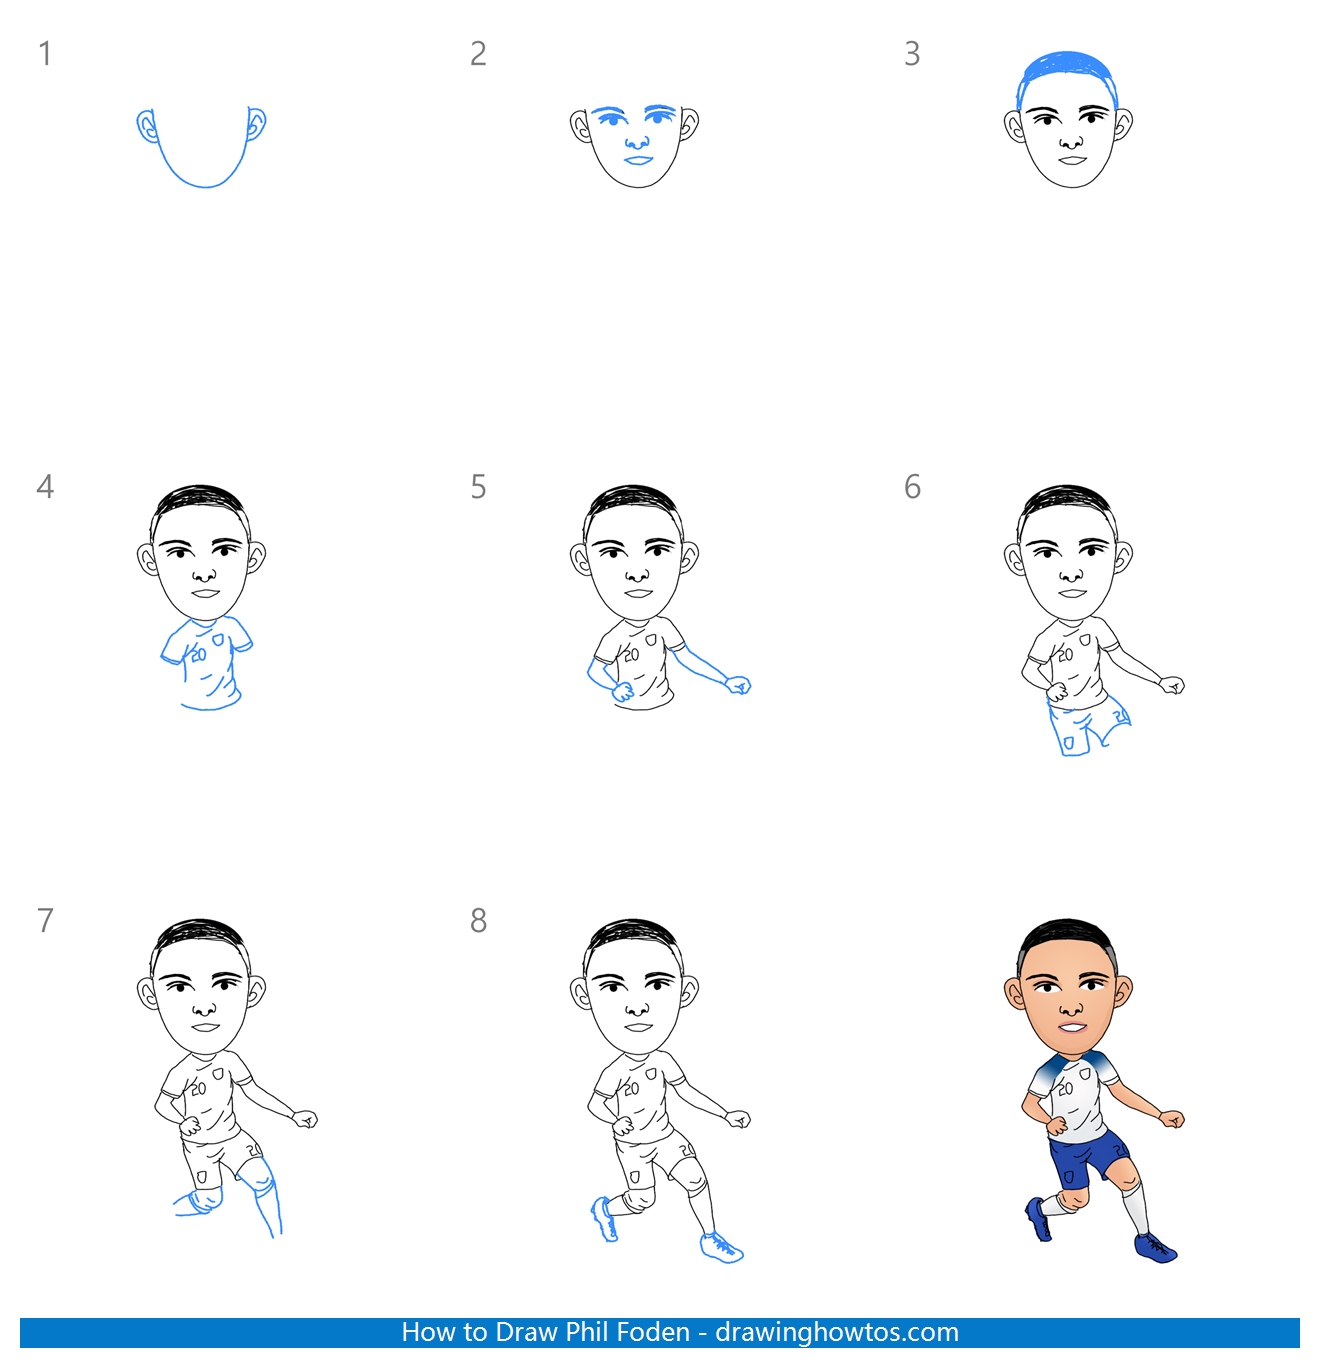 How to Draw Phil Foden Step by Step